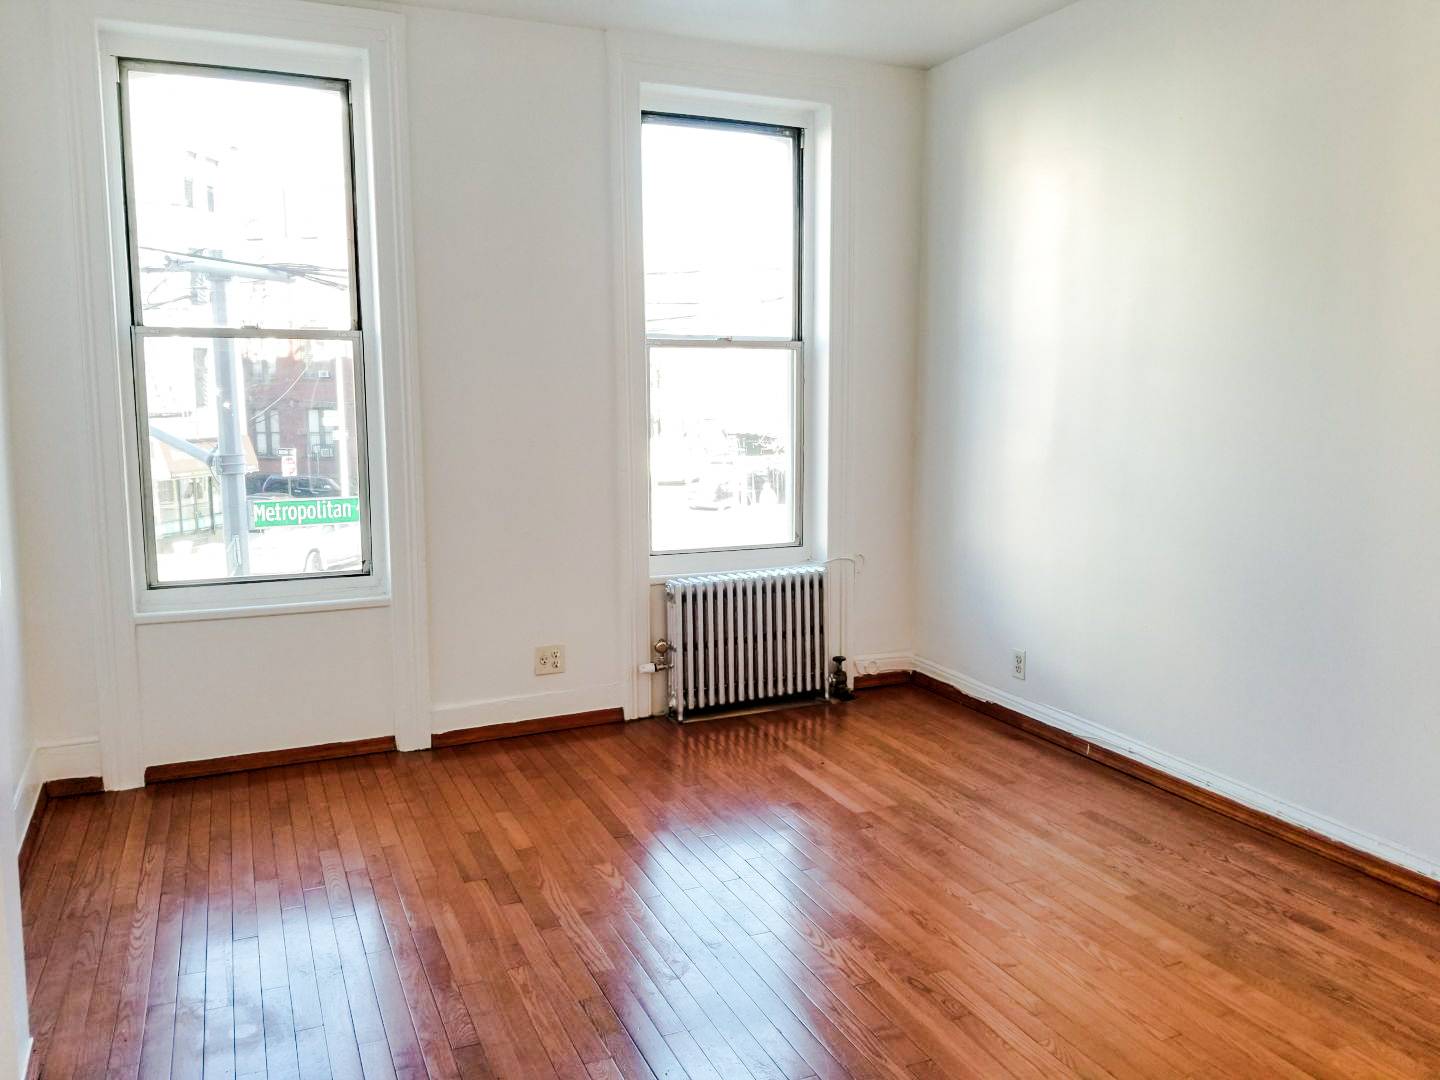 Massive, Must See 4 Room Railroad Apartment in the Heart Williamsburg!